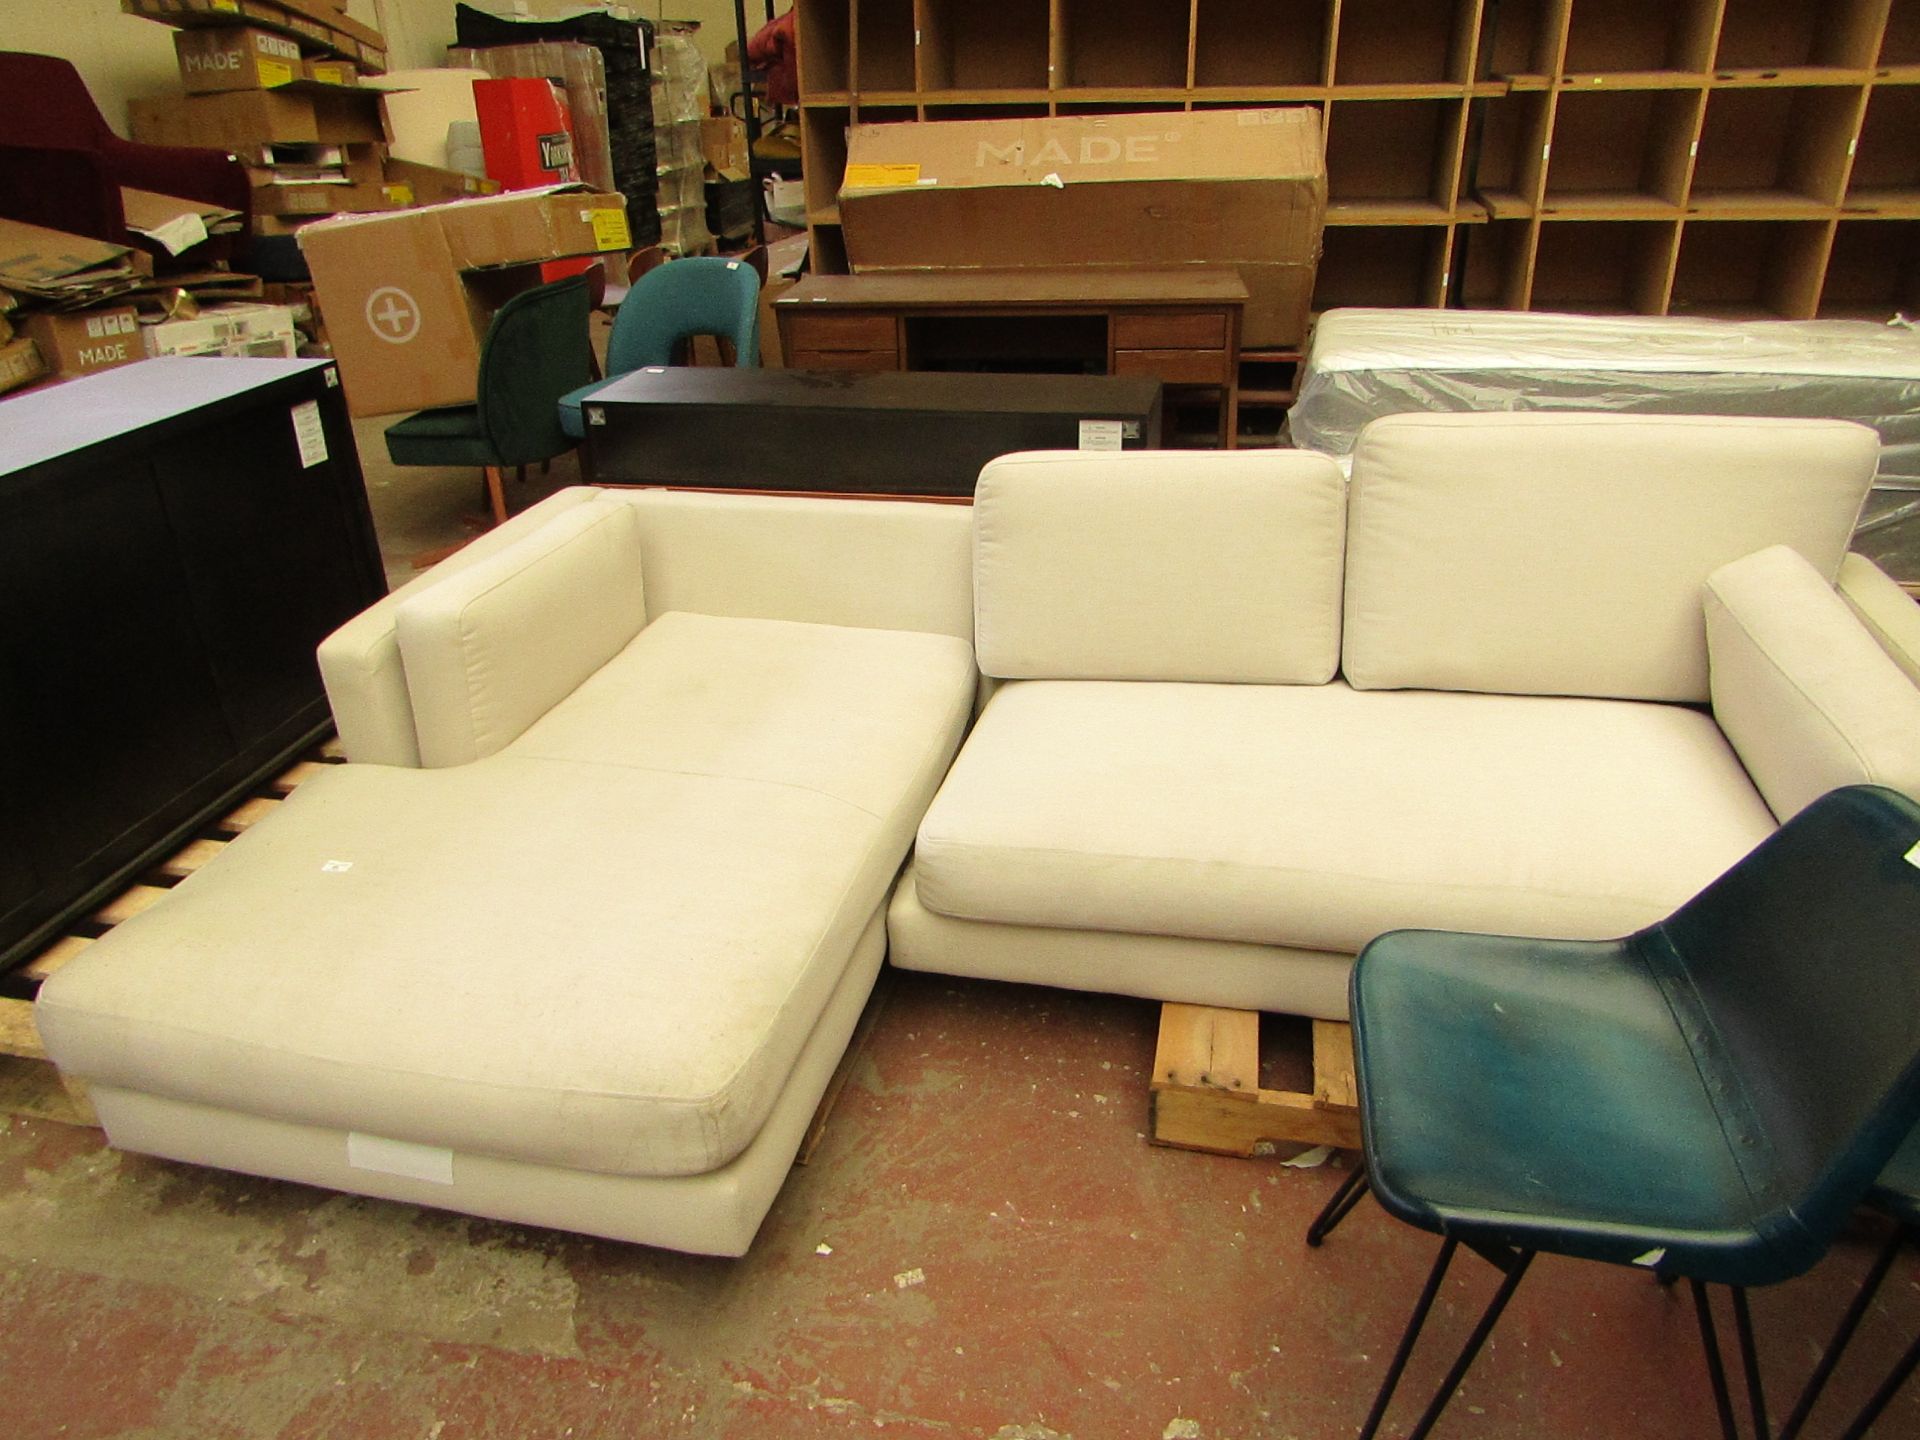 | 1X | SWOON 3 SEATER CORNER SOFA IN CREAM | HAS DIRTY MARKS, IS MISSING A BACK CUSHION AND DOES NOT